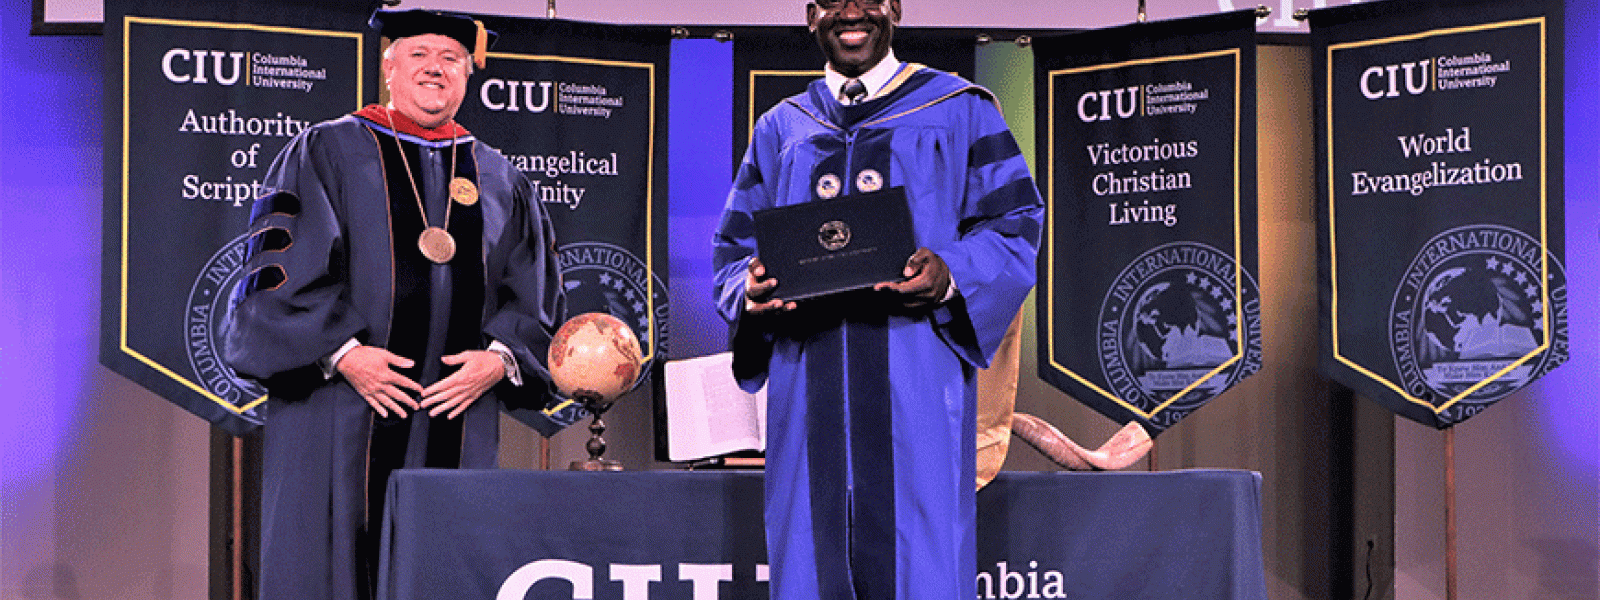 Keeping social distance, CIU President Mark Smith poses with graduate Patrick Gue who earned a Ph.D. in Intercultural Studies. Gue is originally from Haiti and pastors a church in South Carolina.